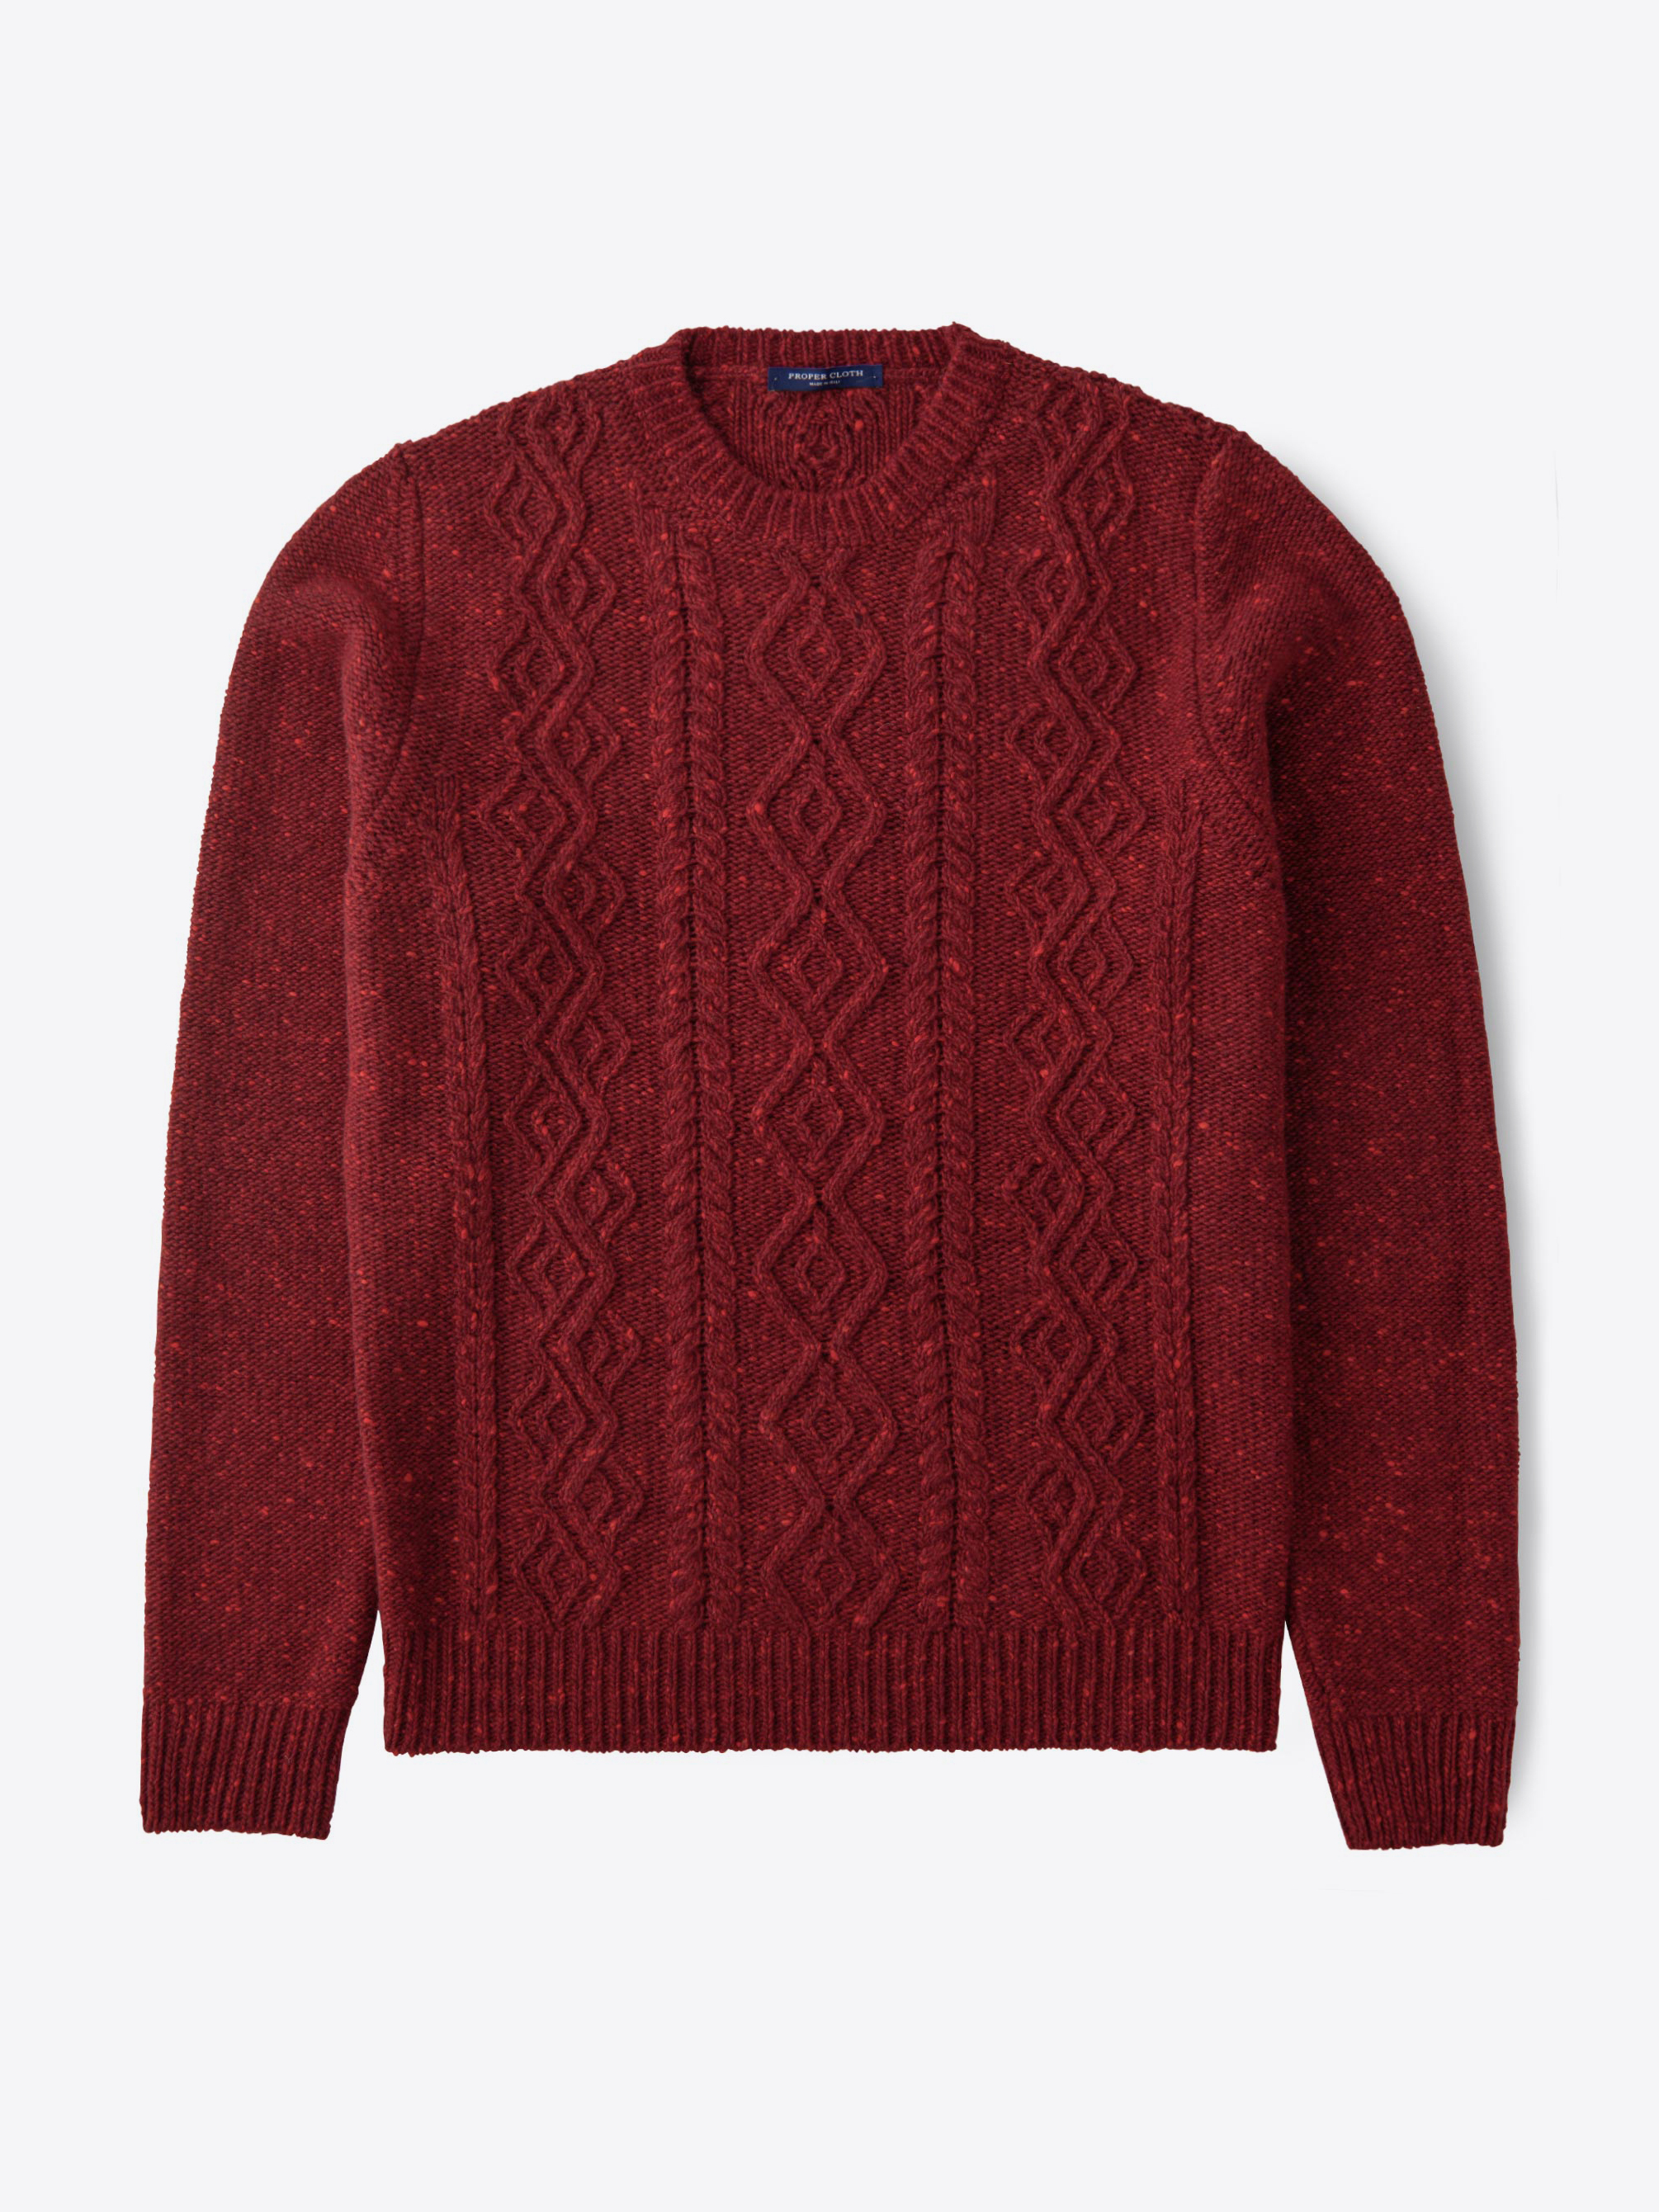 Zoom Image of Red Italian Wool and Cashmere Aran Crewneck Sweater